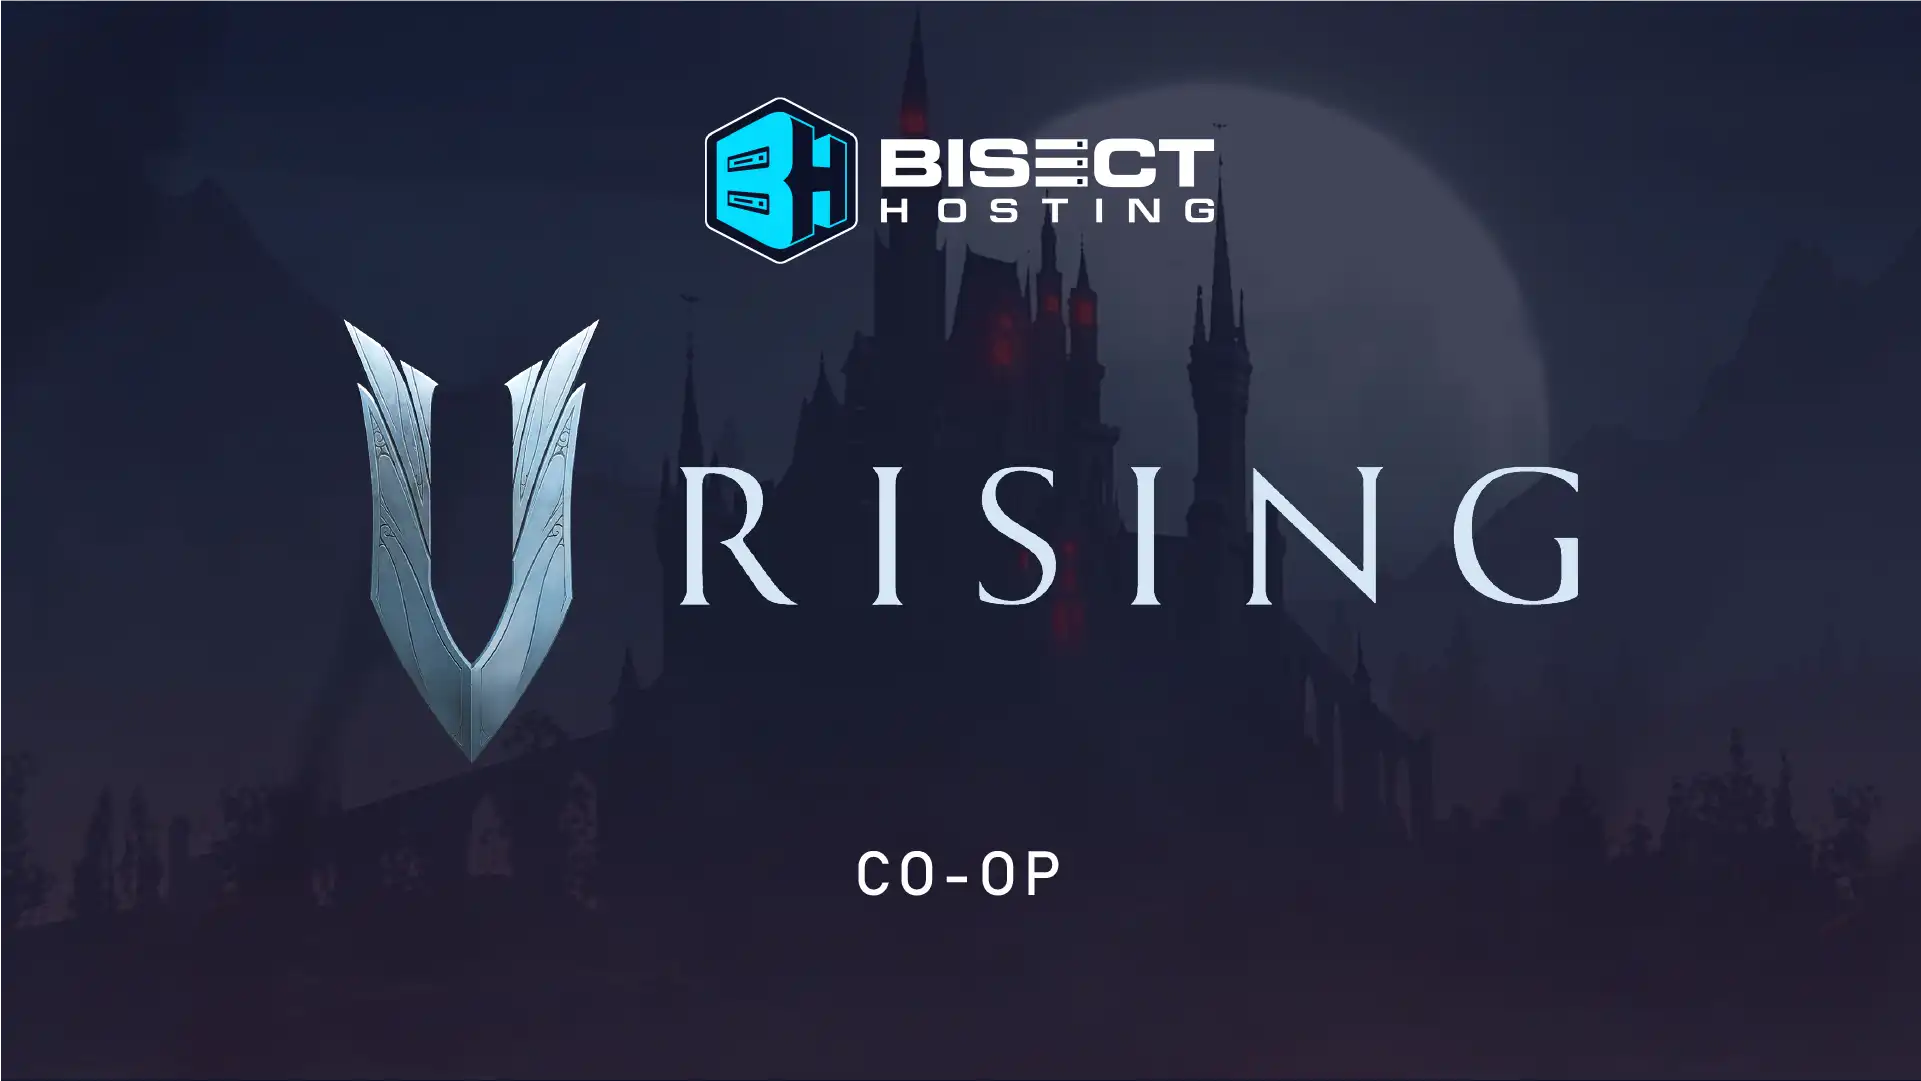 V Rising Co-Op: How to Play Online with Friends